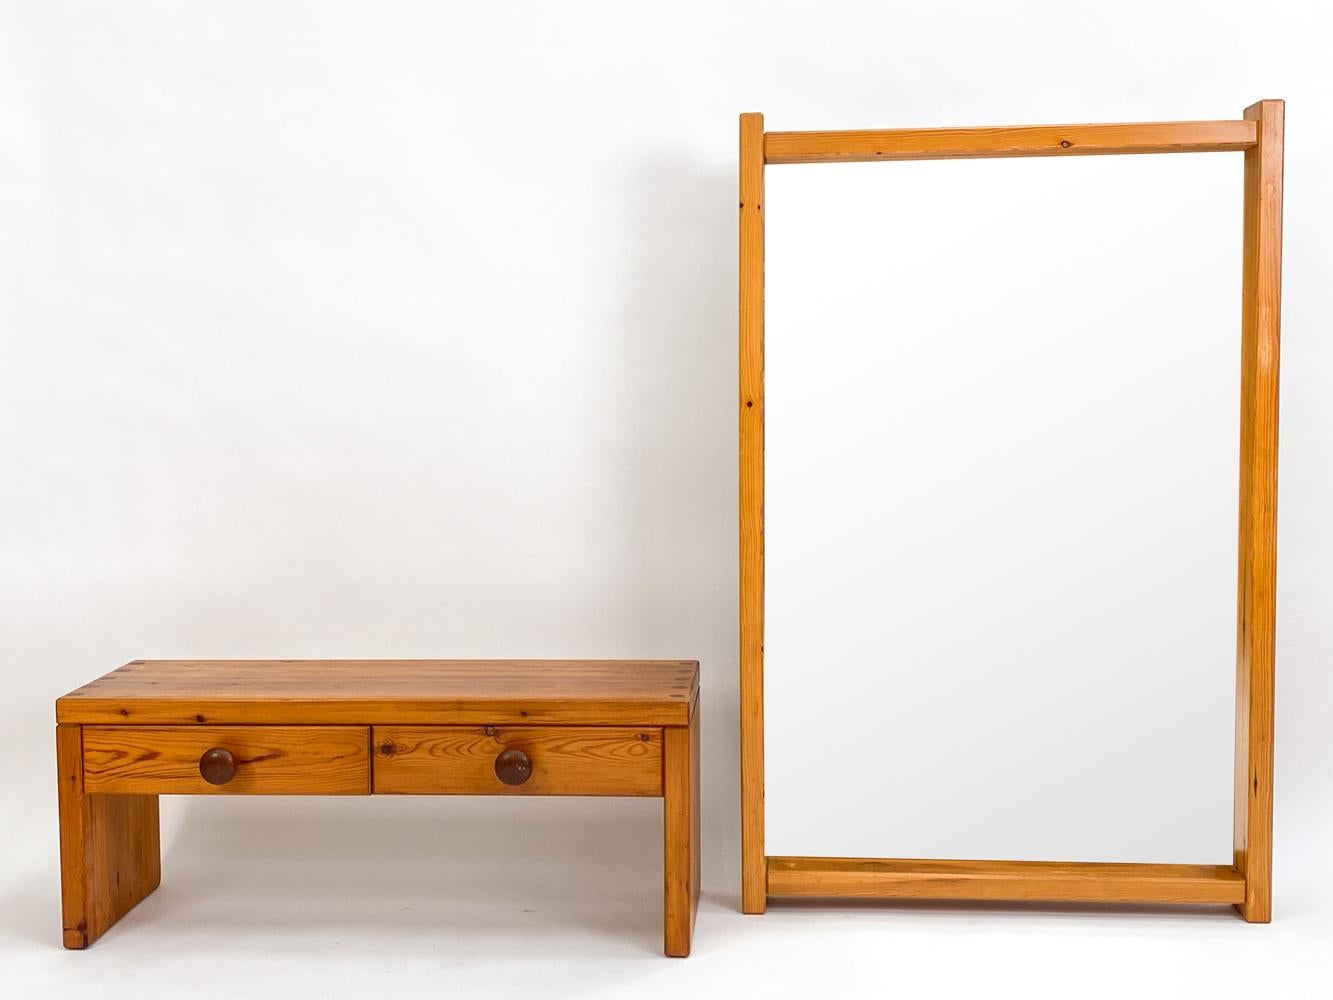 Step into the golden era of Scandinavian design with the Sven Larsson Danish Mid-Century Pine Hall Mirror & Petite Chest/Bench. A true embodiment of the 1970s Nordic aesthetic, this ensemble seamlessly marries form and function in a dance of pine